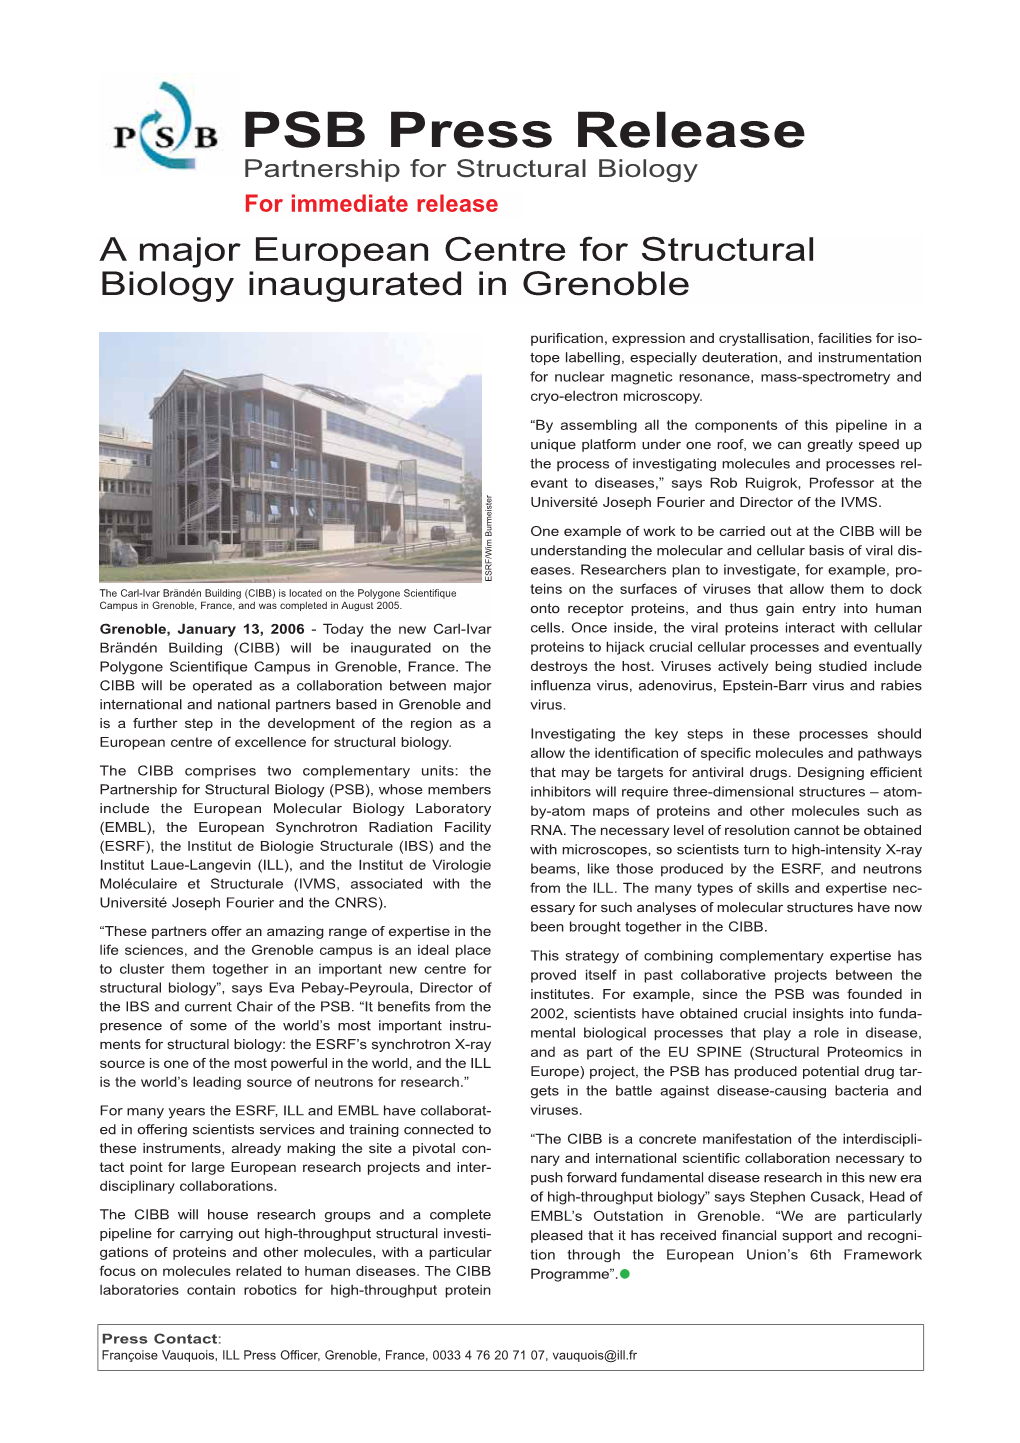 PSB Press Release Partnership for Structural Biology for Immediate Release a Major European Centre for Structural Biology Inaugurated in Grenoble